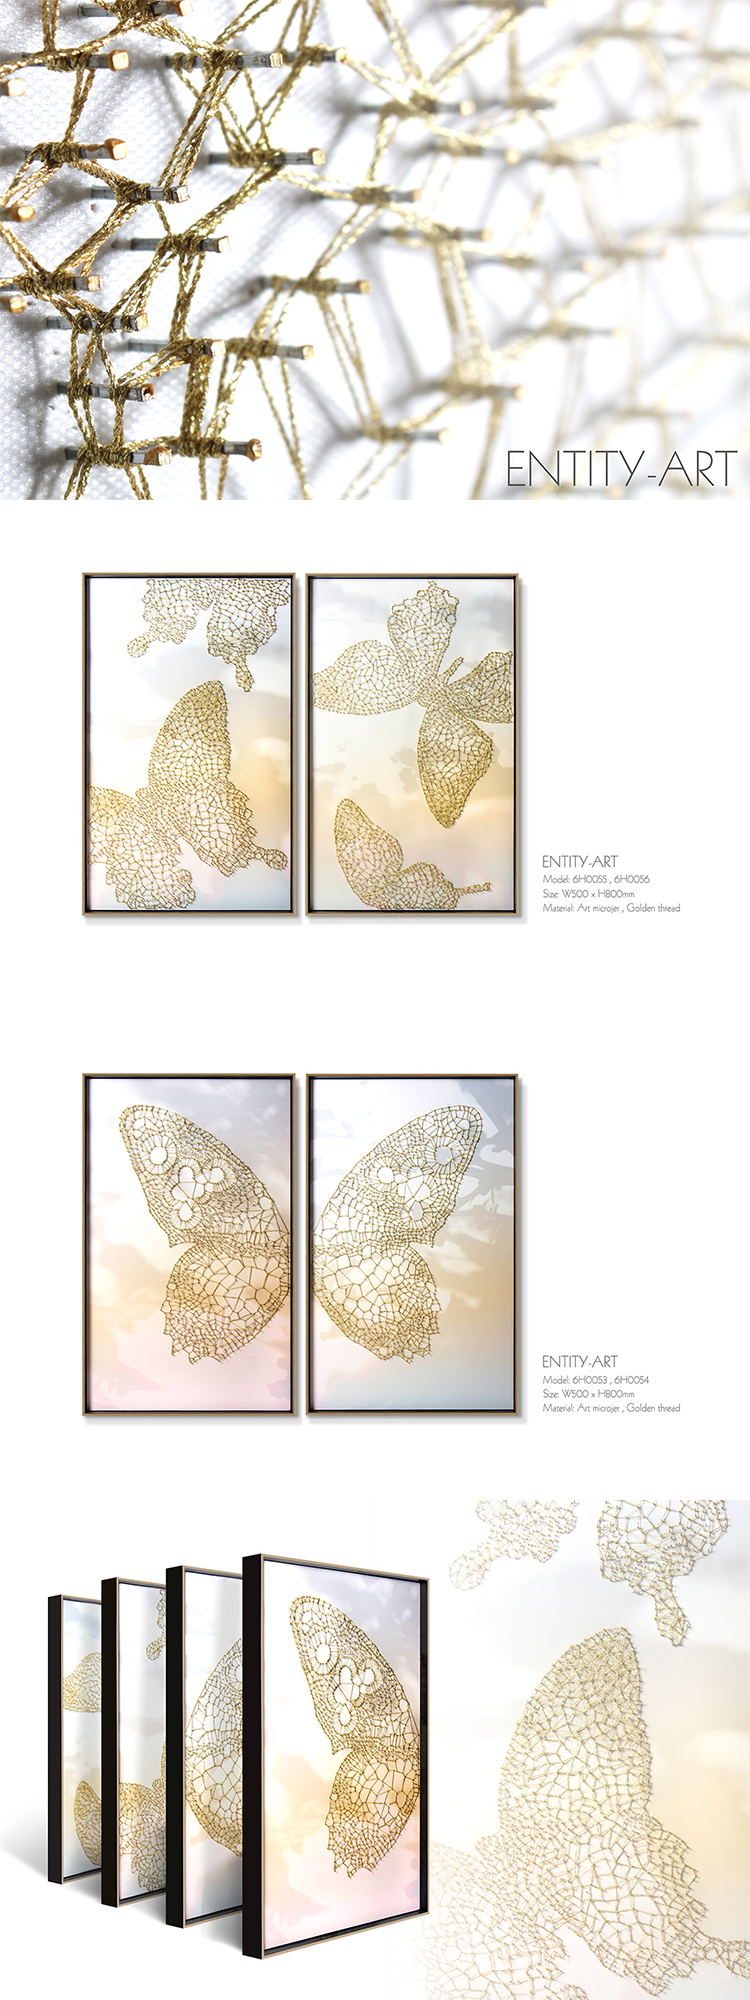 Creative design 100% Handmade Fabric nail painting artwork living room decoration 3D Gold butterfly wall art home decor